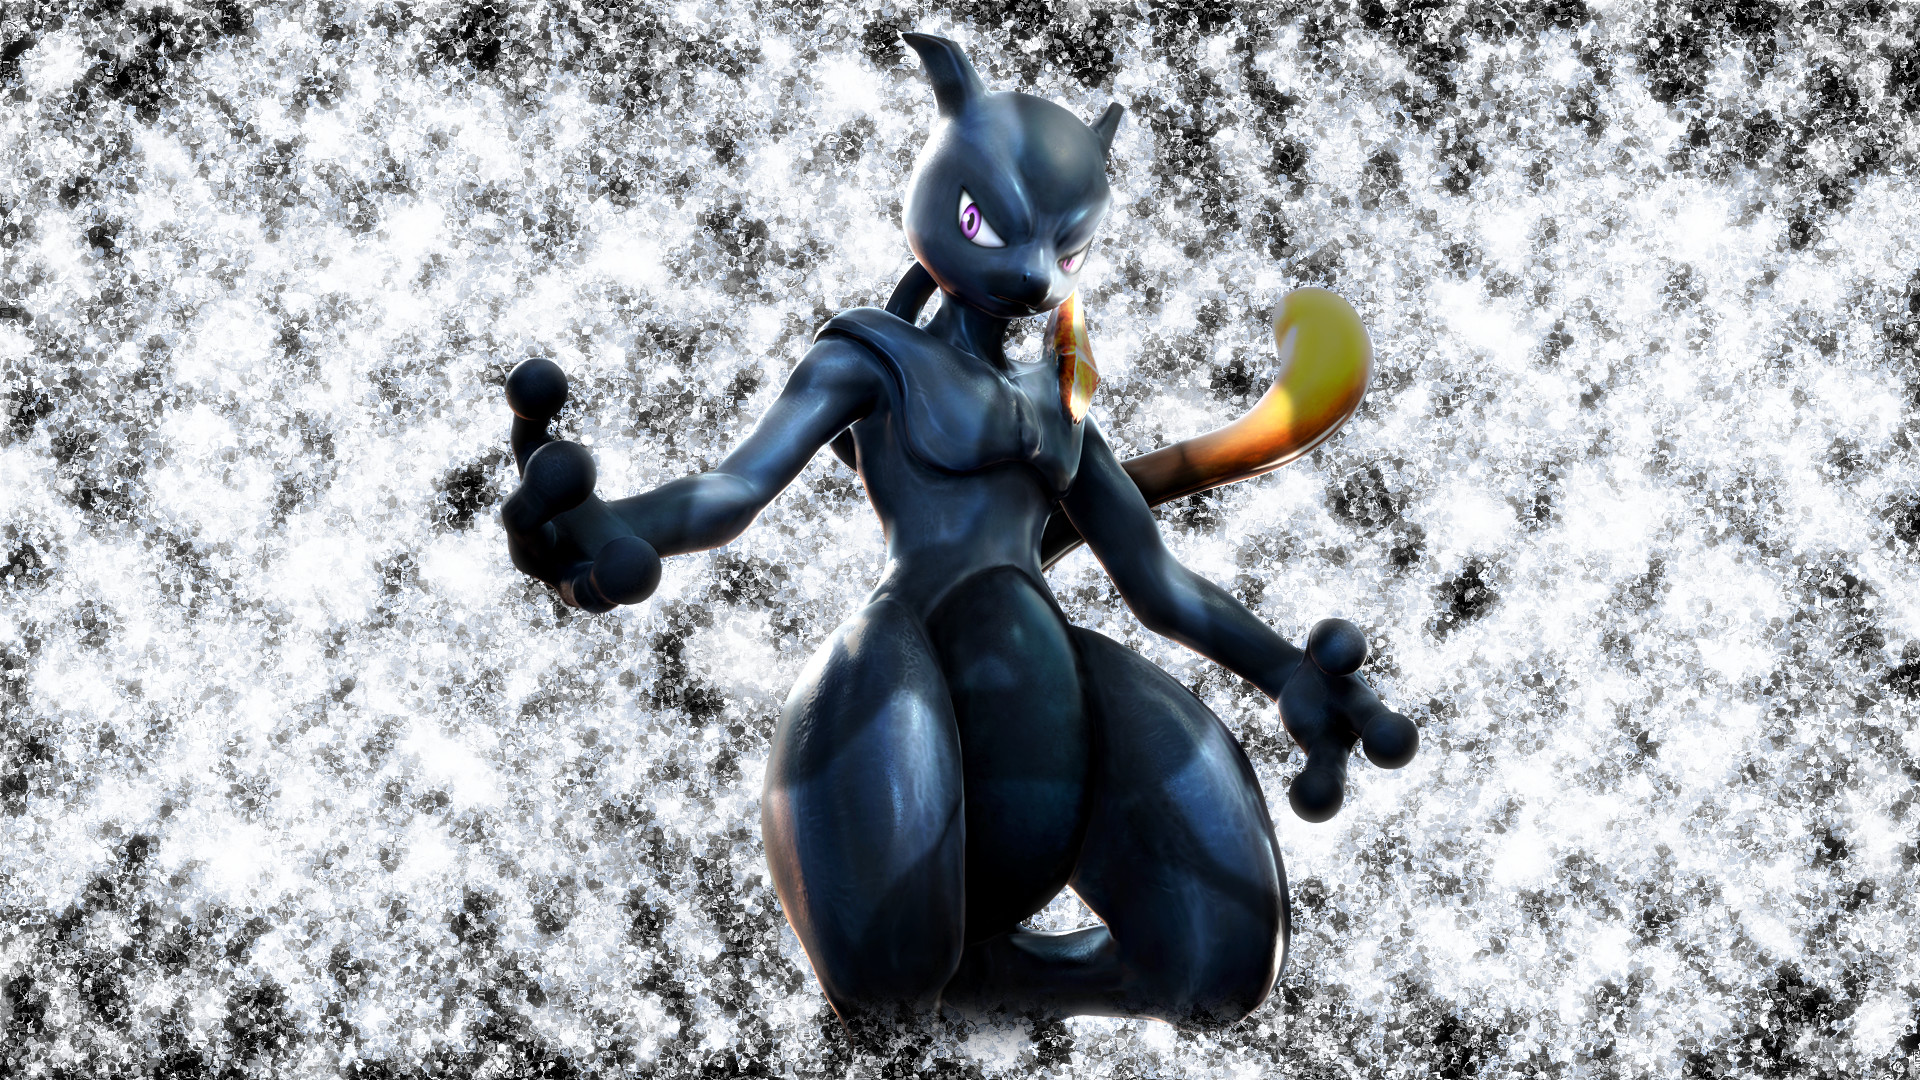 1920x1080 Shadow Mewtwo PT Wallpaper by Glench on DeviantArt.